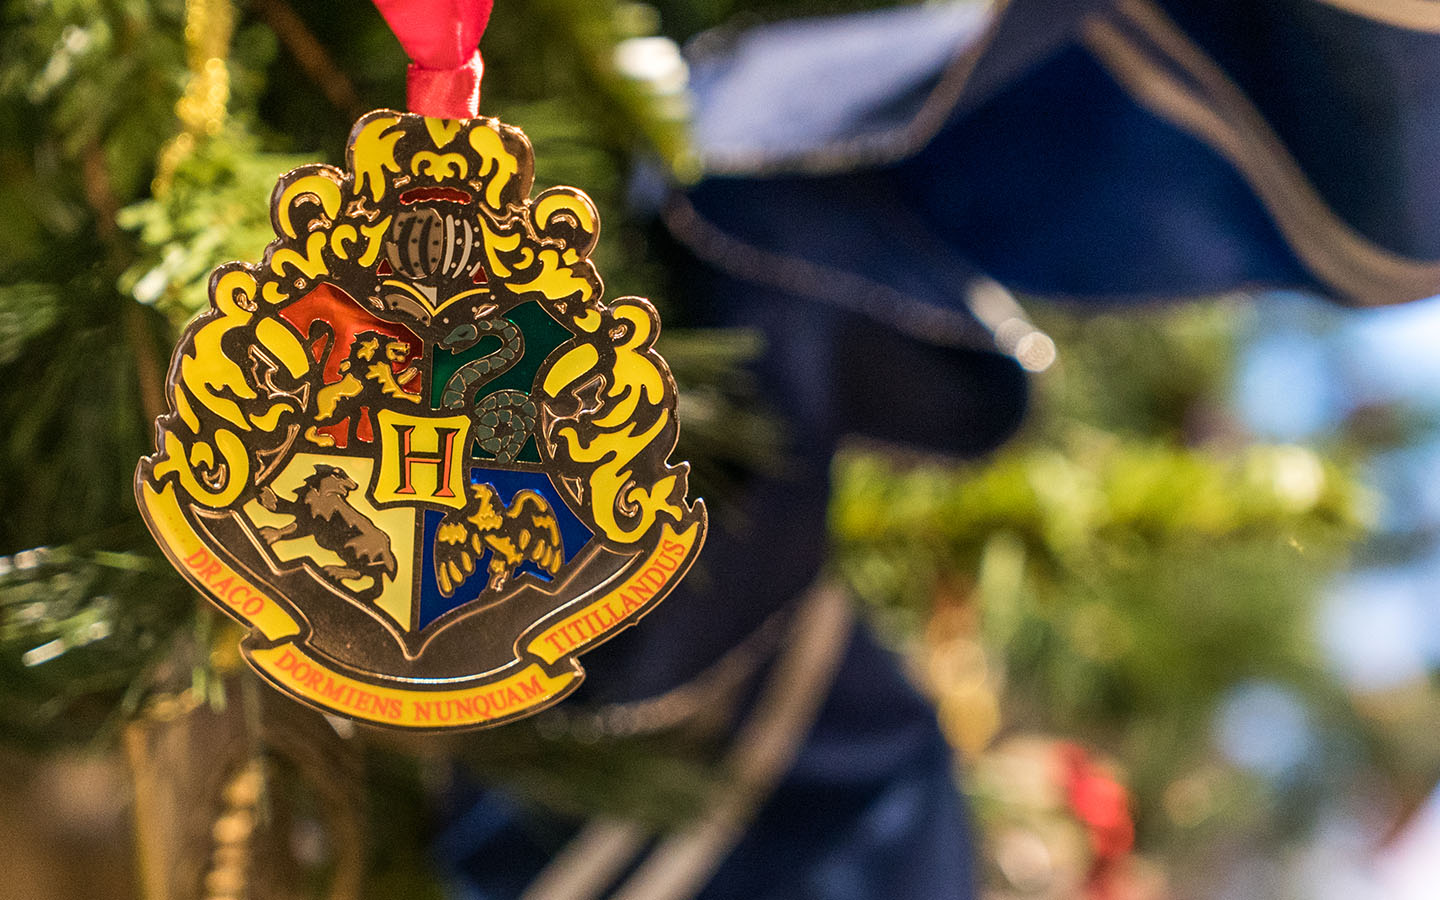 Hogwarts Crest Ornament from The Wizarding World of Harry Potter